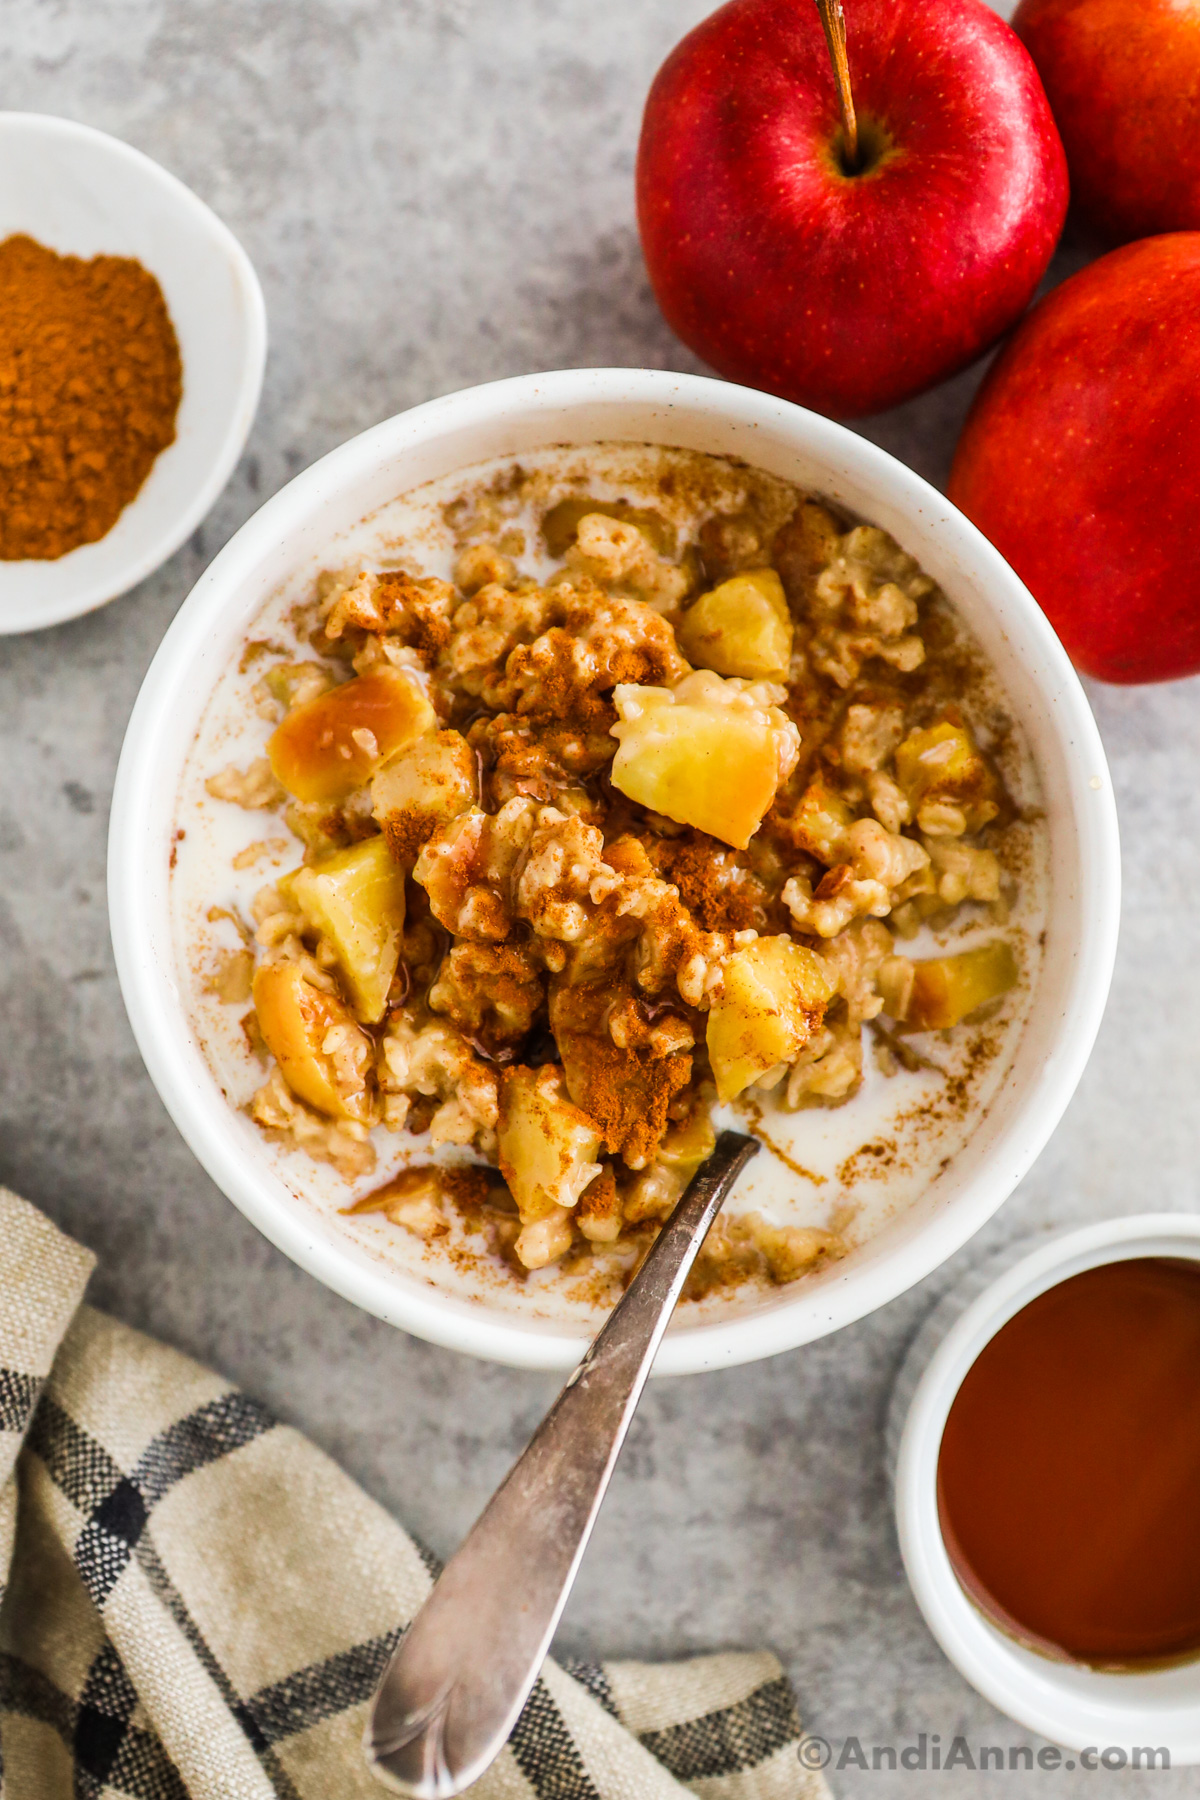 A bowl of apple cinnamon oatmeal with milk inside and a spoon. Surround with red apples and bowls of cinnamon and maple syrup/.